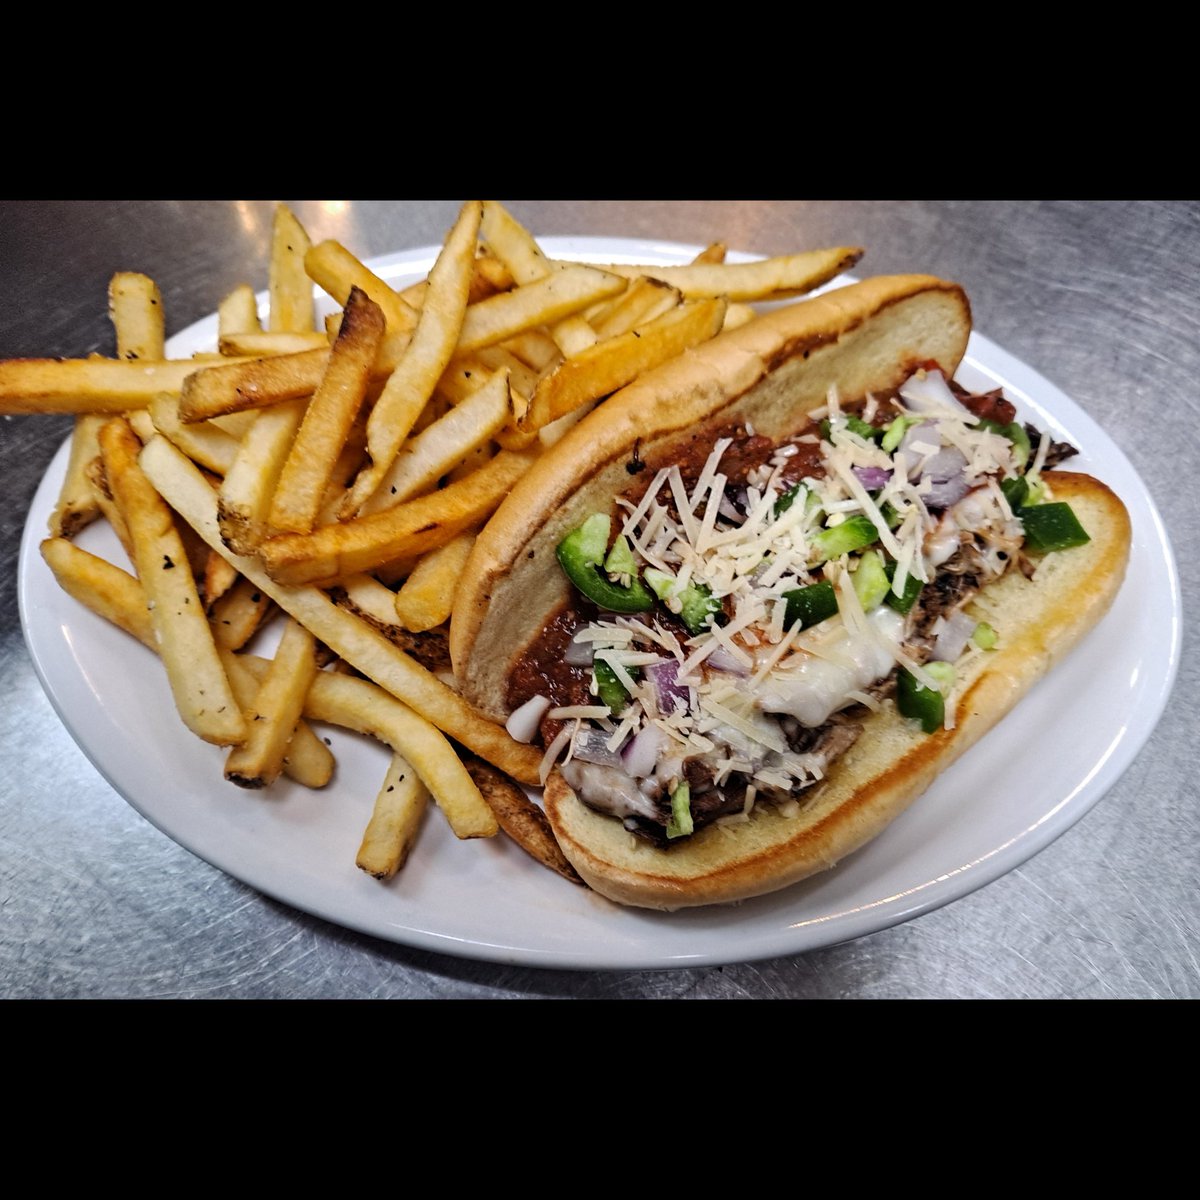 New Weekly Food Special - Smoked Pork Pizza Hoagie! Our house-smoked pork with scratch-made marinara, served on a toasted roll, with mozzarella, jalapeno, red onion and parmesan cheese. Served with a side item of your choice. #BrewedOnBase